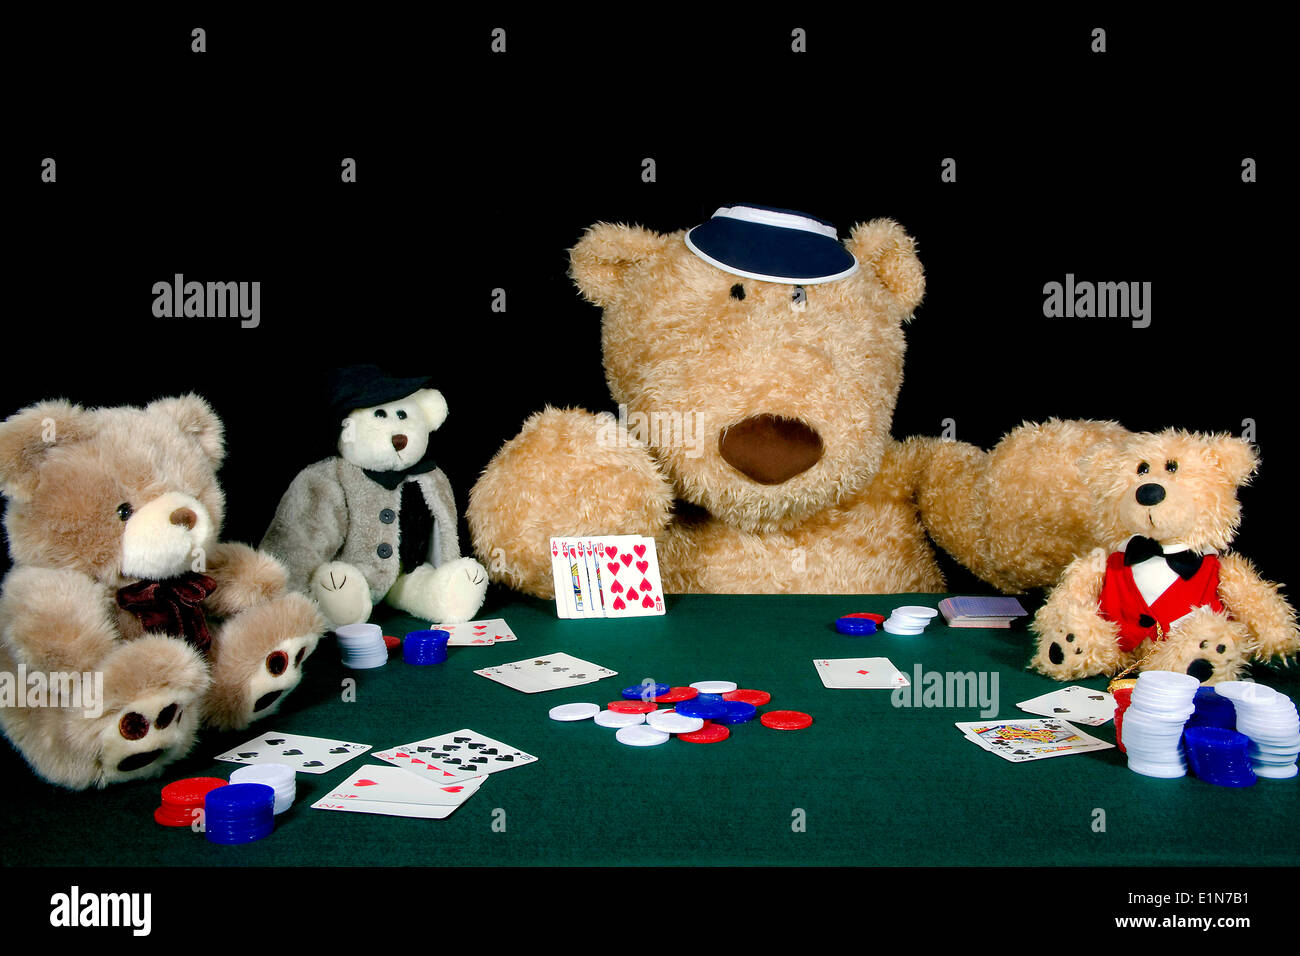 Group of teddy bears playing a friendly game of poker. Stock Photo